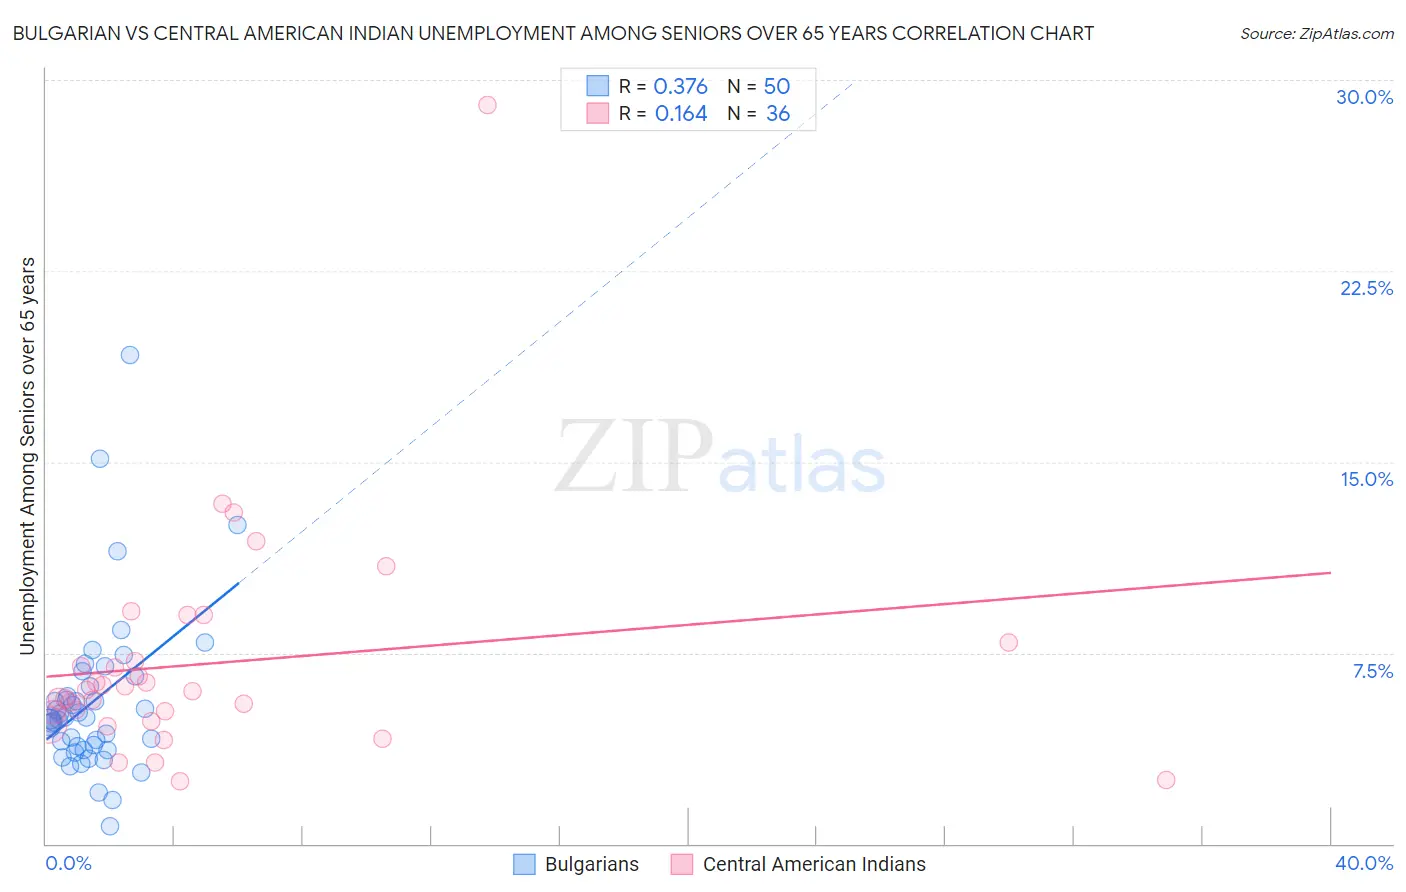 Bulgarian vs Central American Indian Unemployment Among Seniors over 65 years